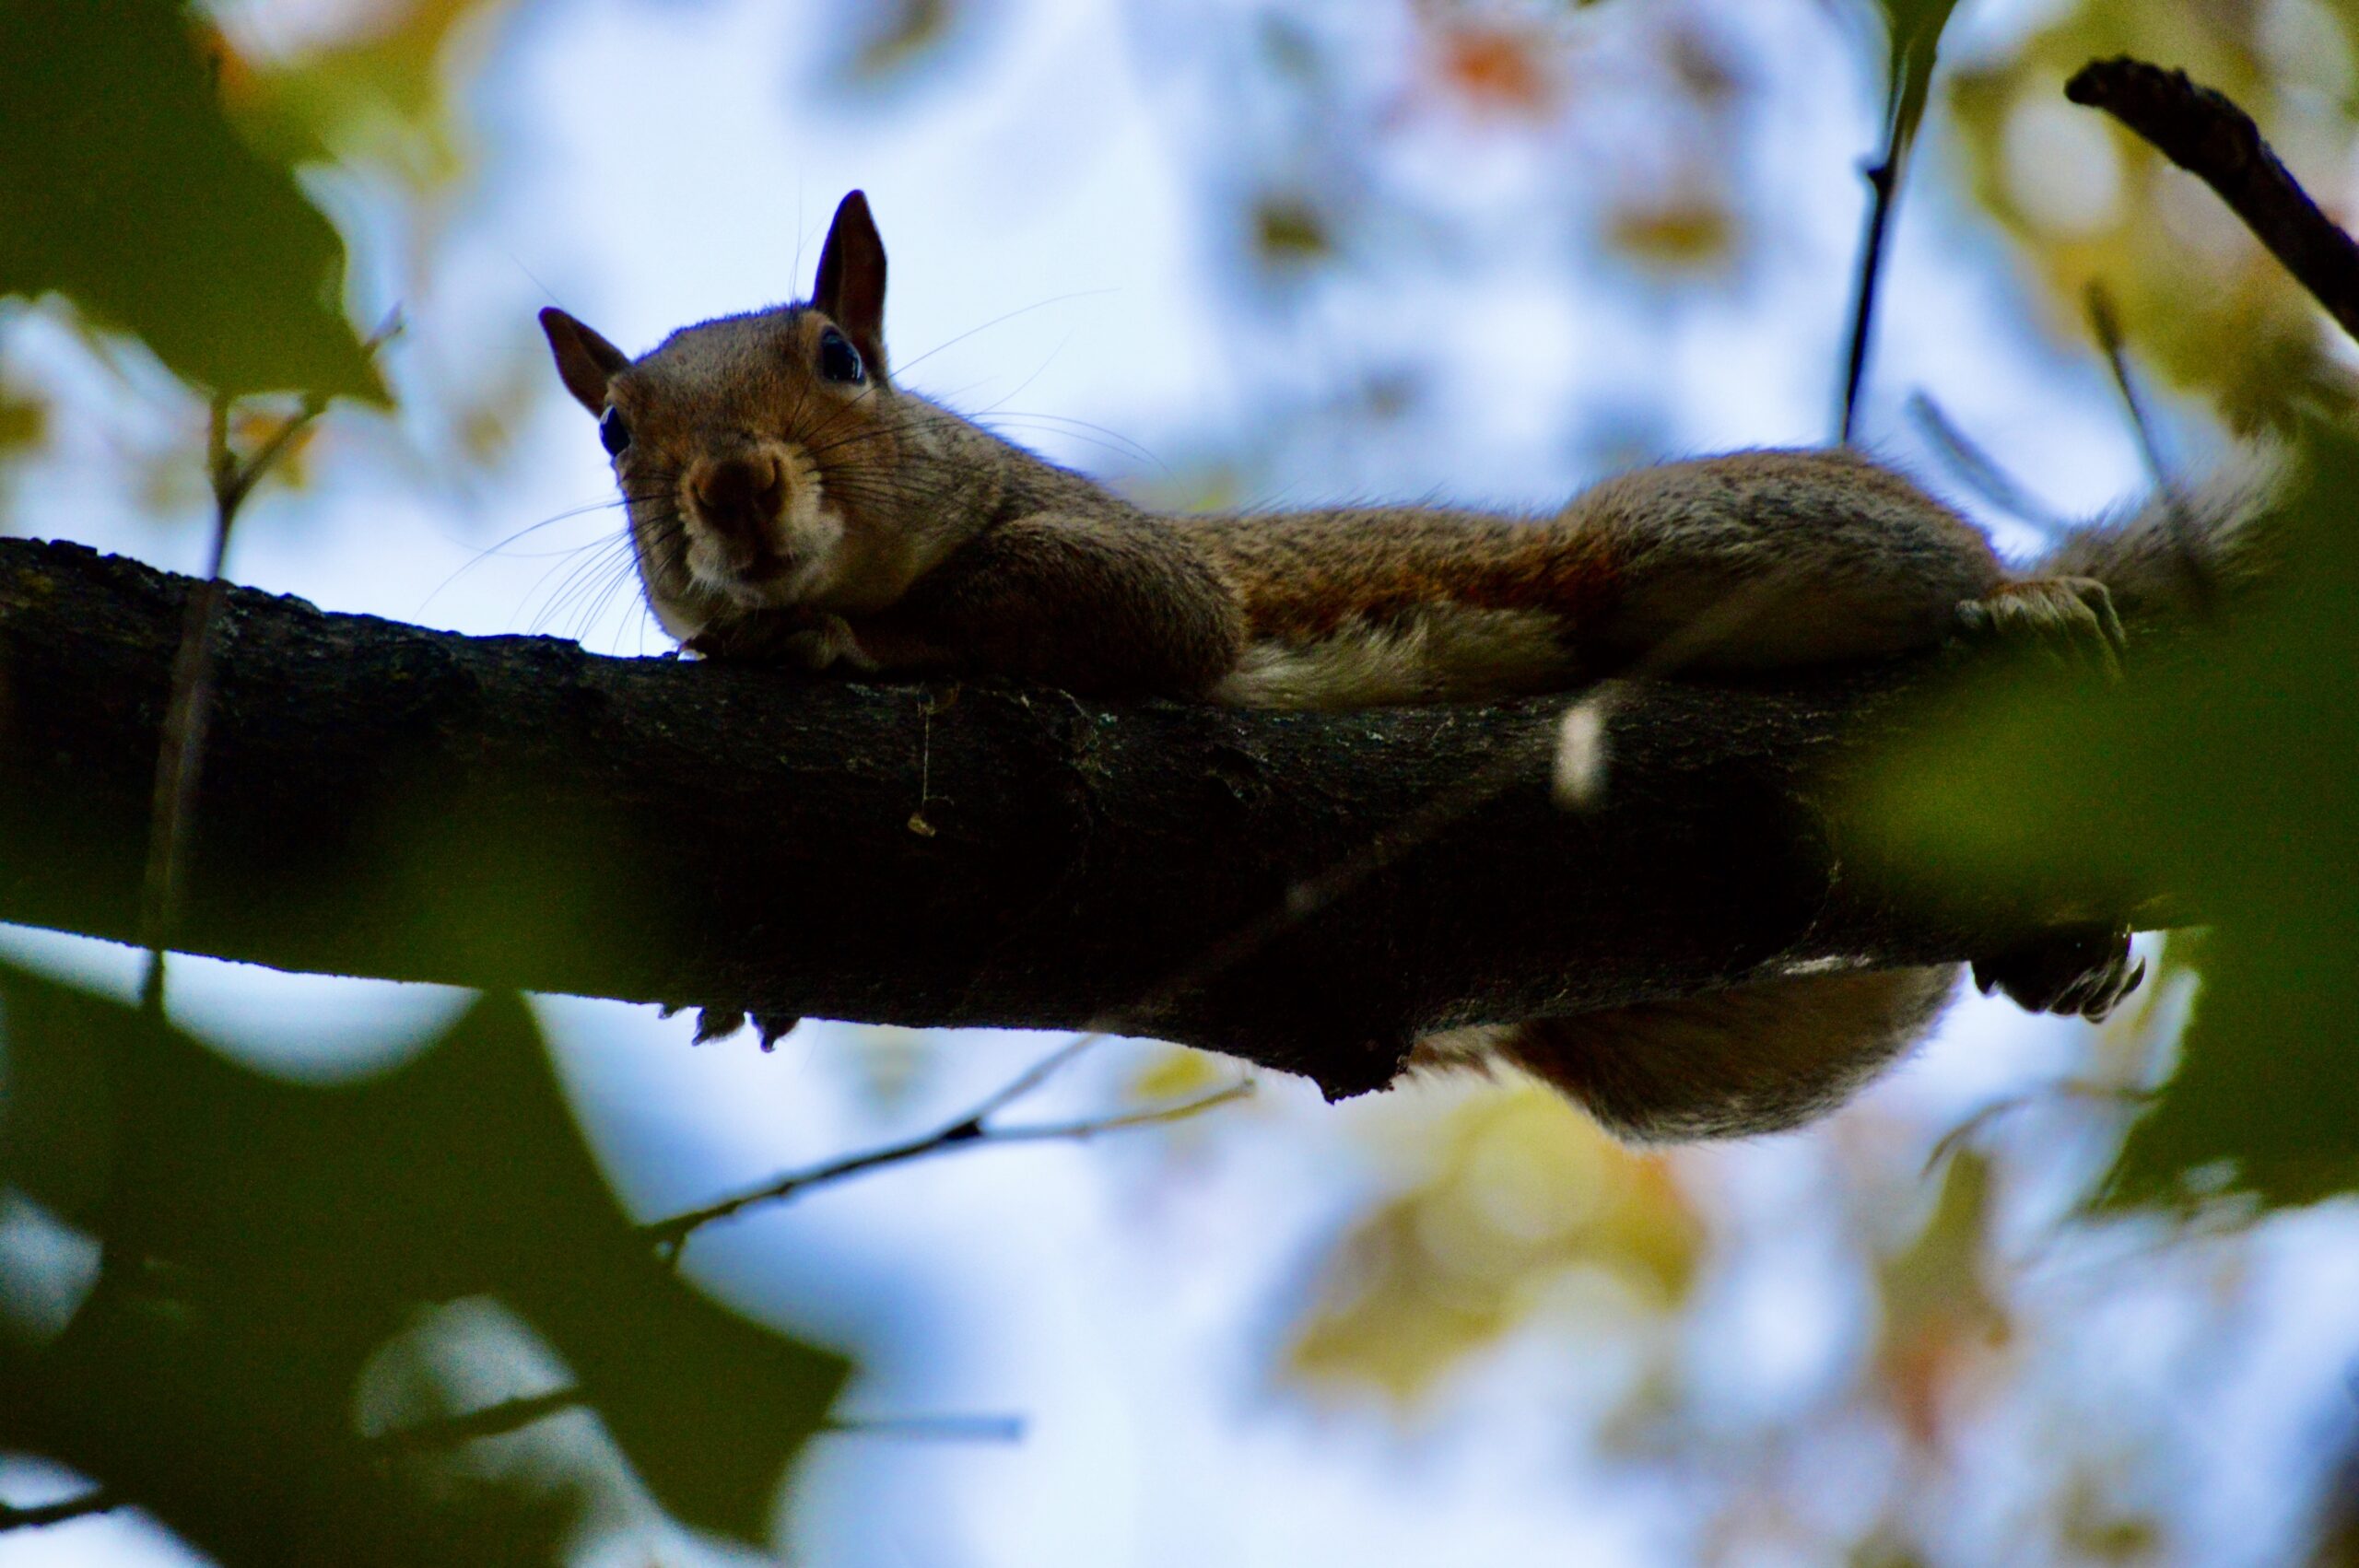 Close up image of a squirrel laying on a branch